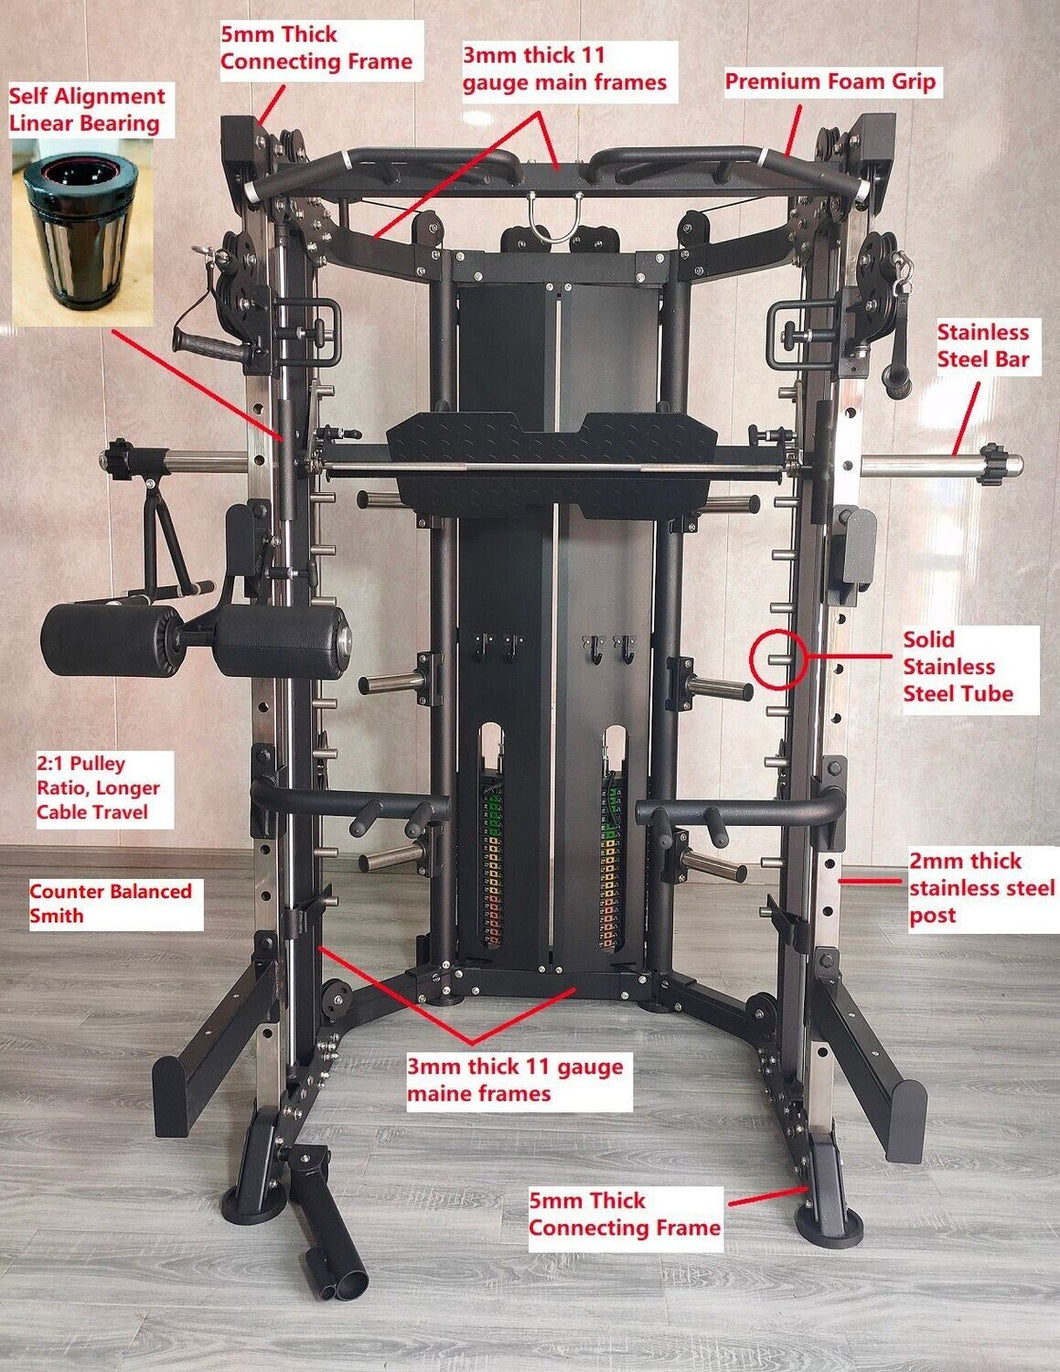 G12 Smith Functional Trainer